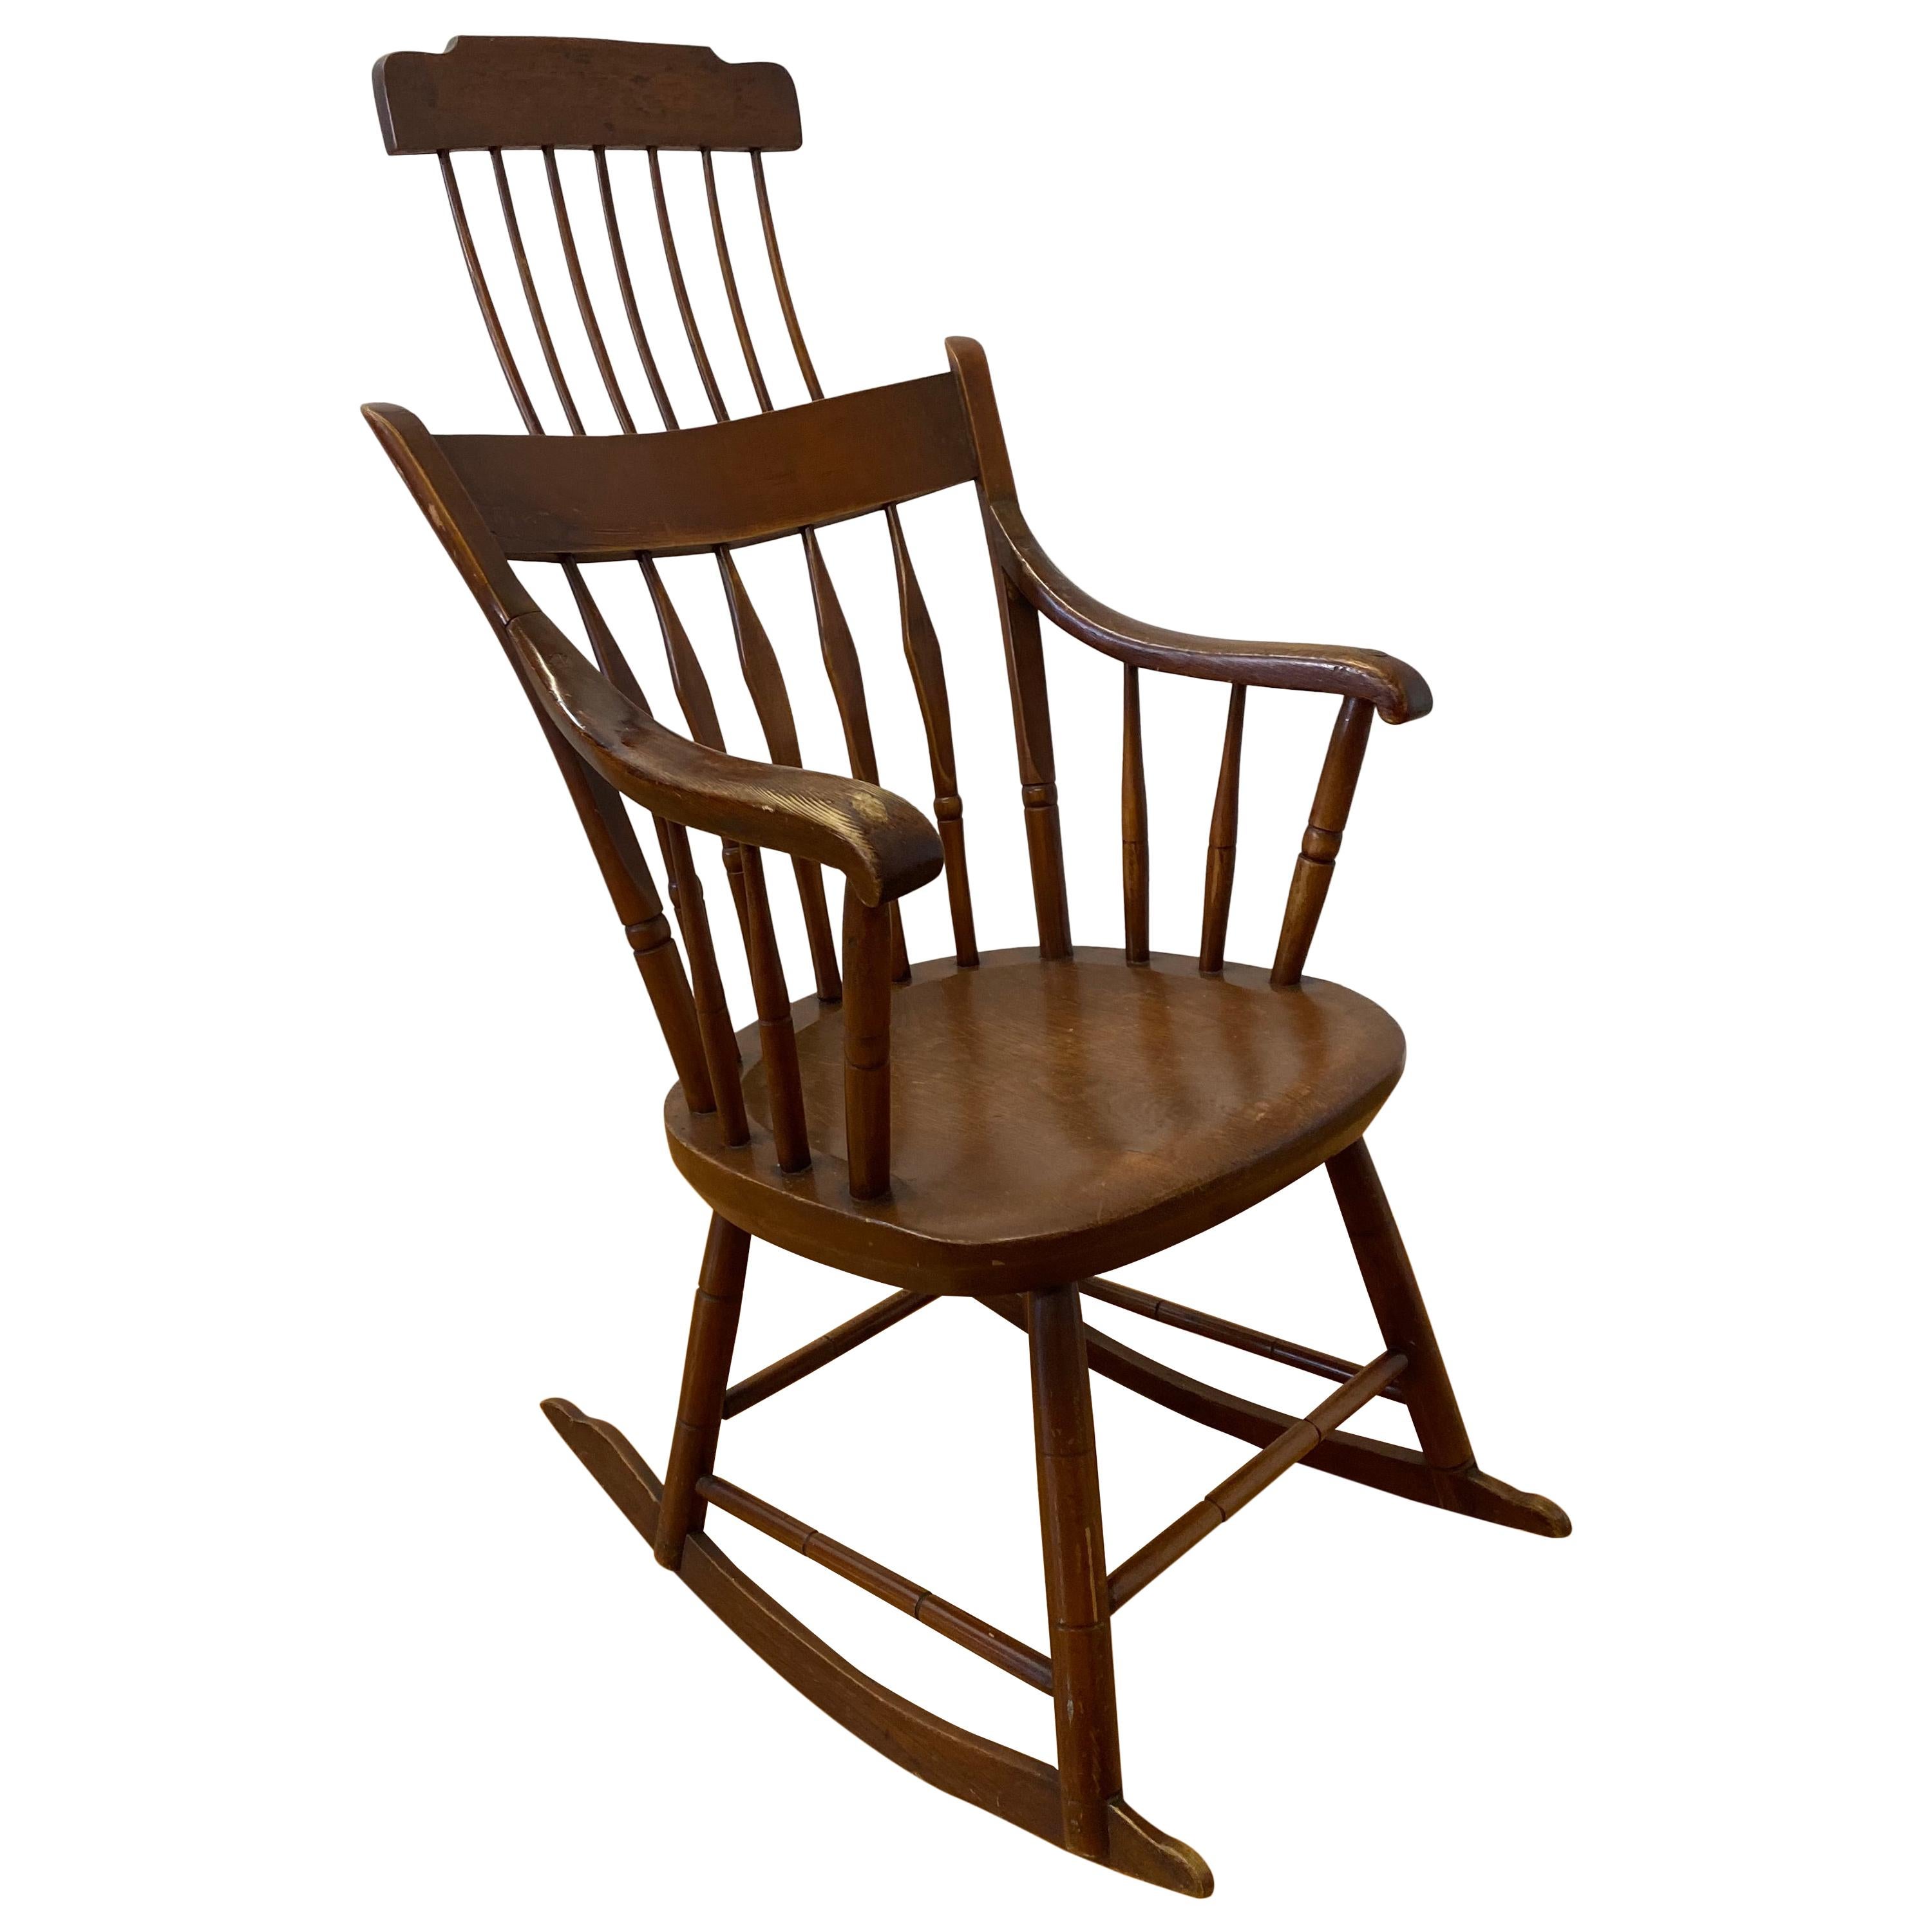 19th Century American Hitchcock High Back Rocking Chair